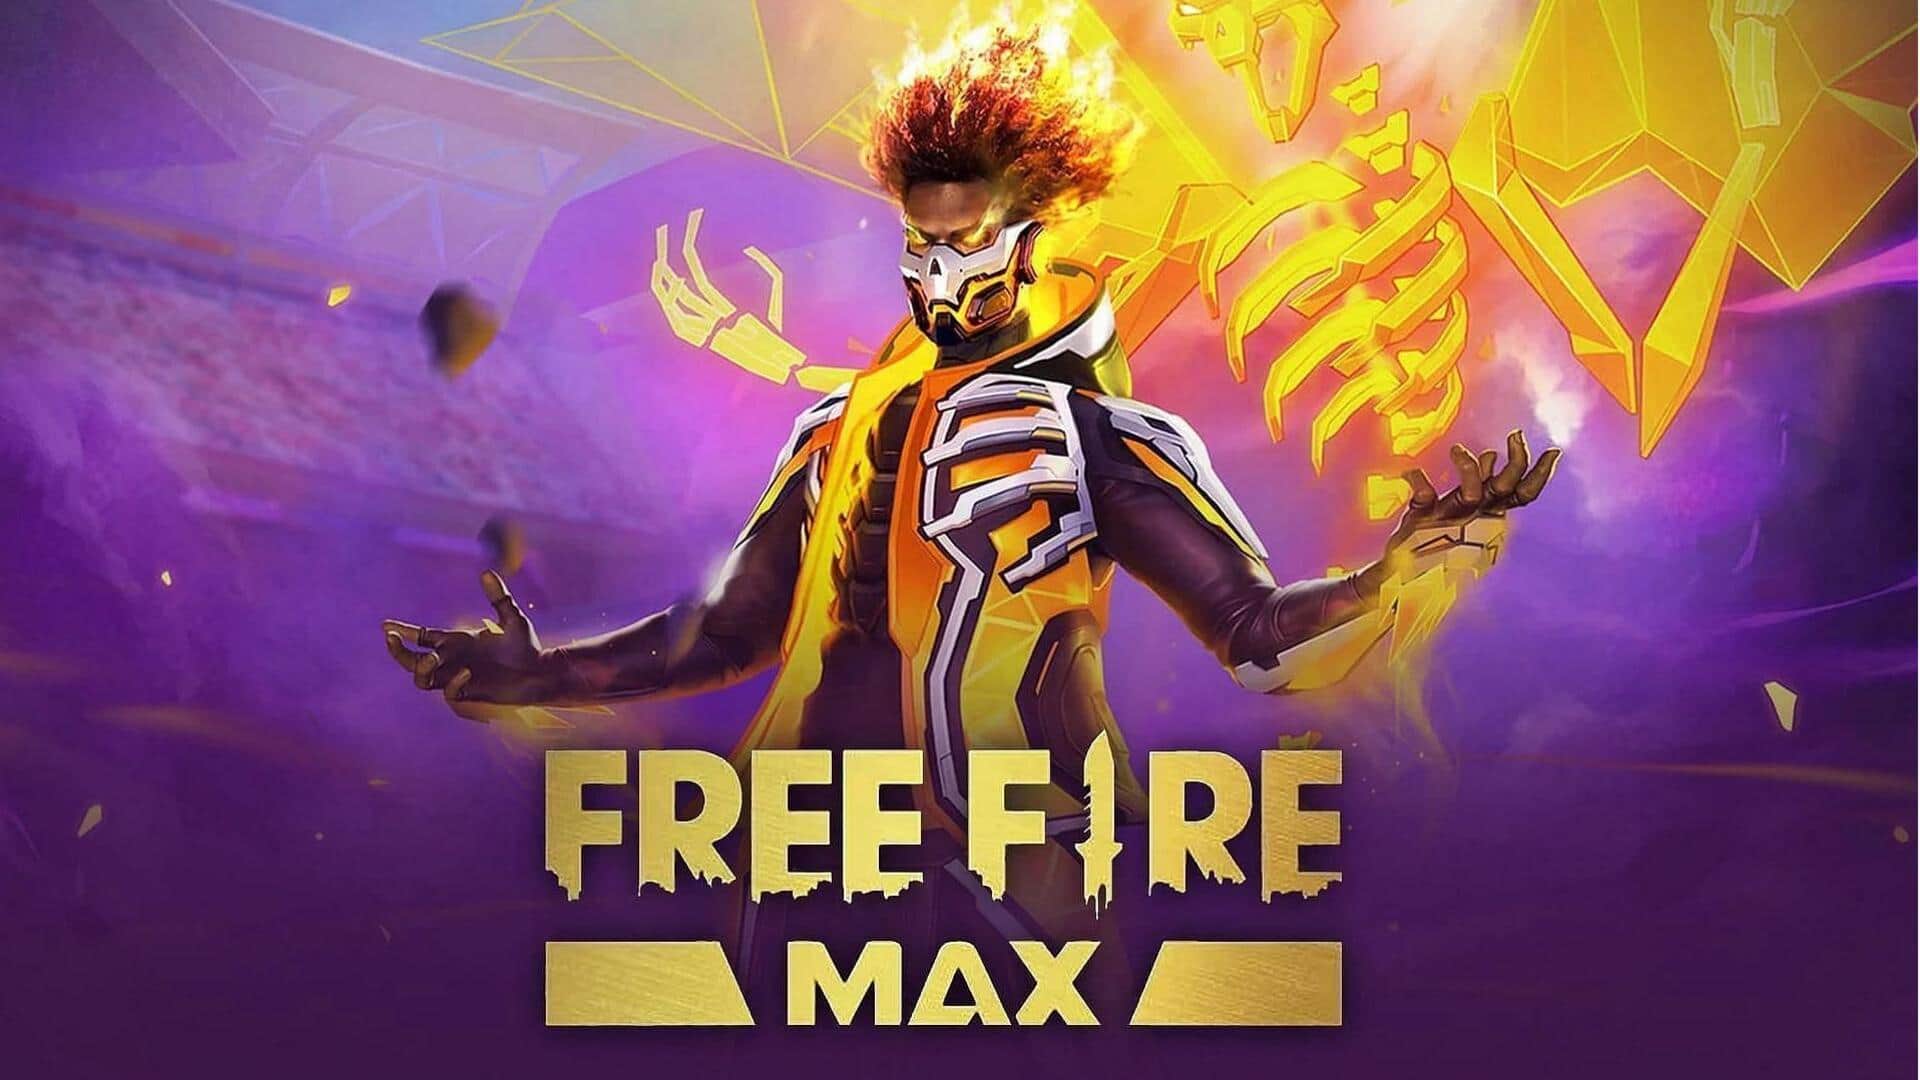 Garena Free Fire MAX's July 31 codes: How to redeem